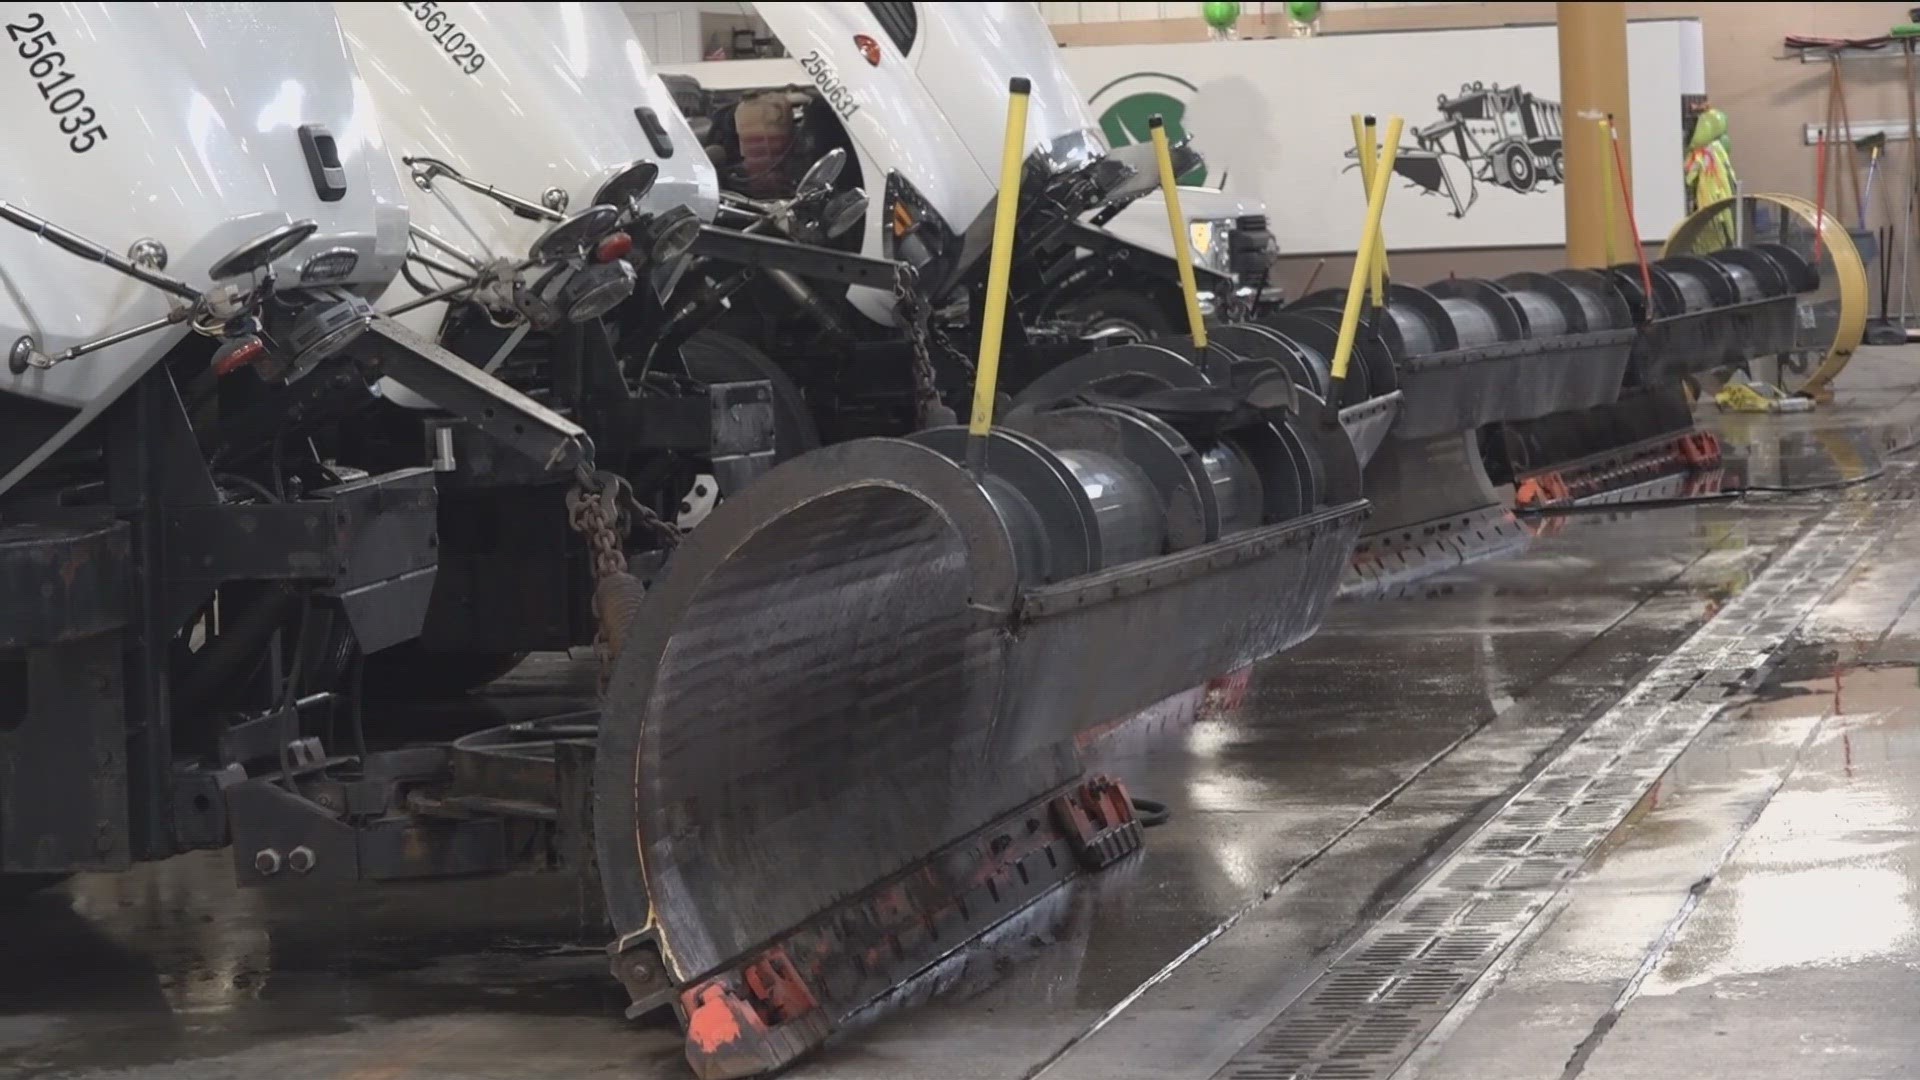 Several ODOT plows have been hit by other vehicles recently during the winter weather.